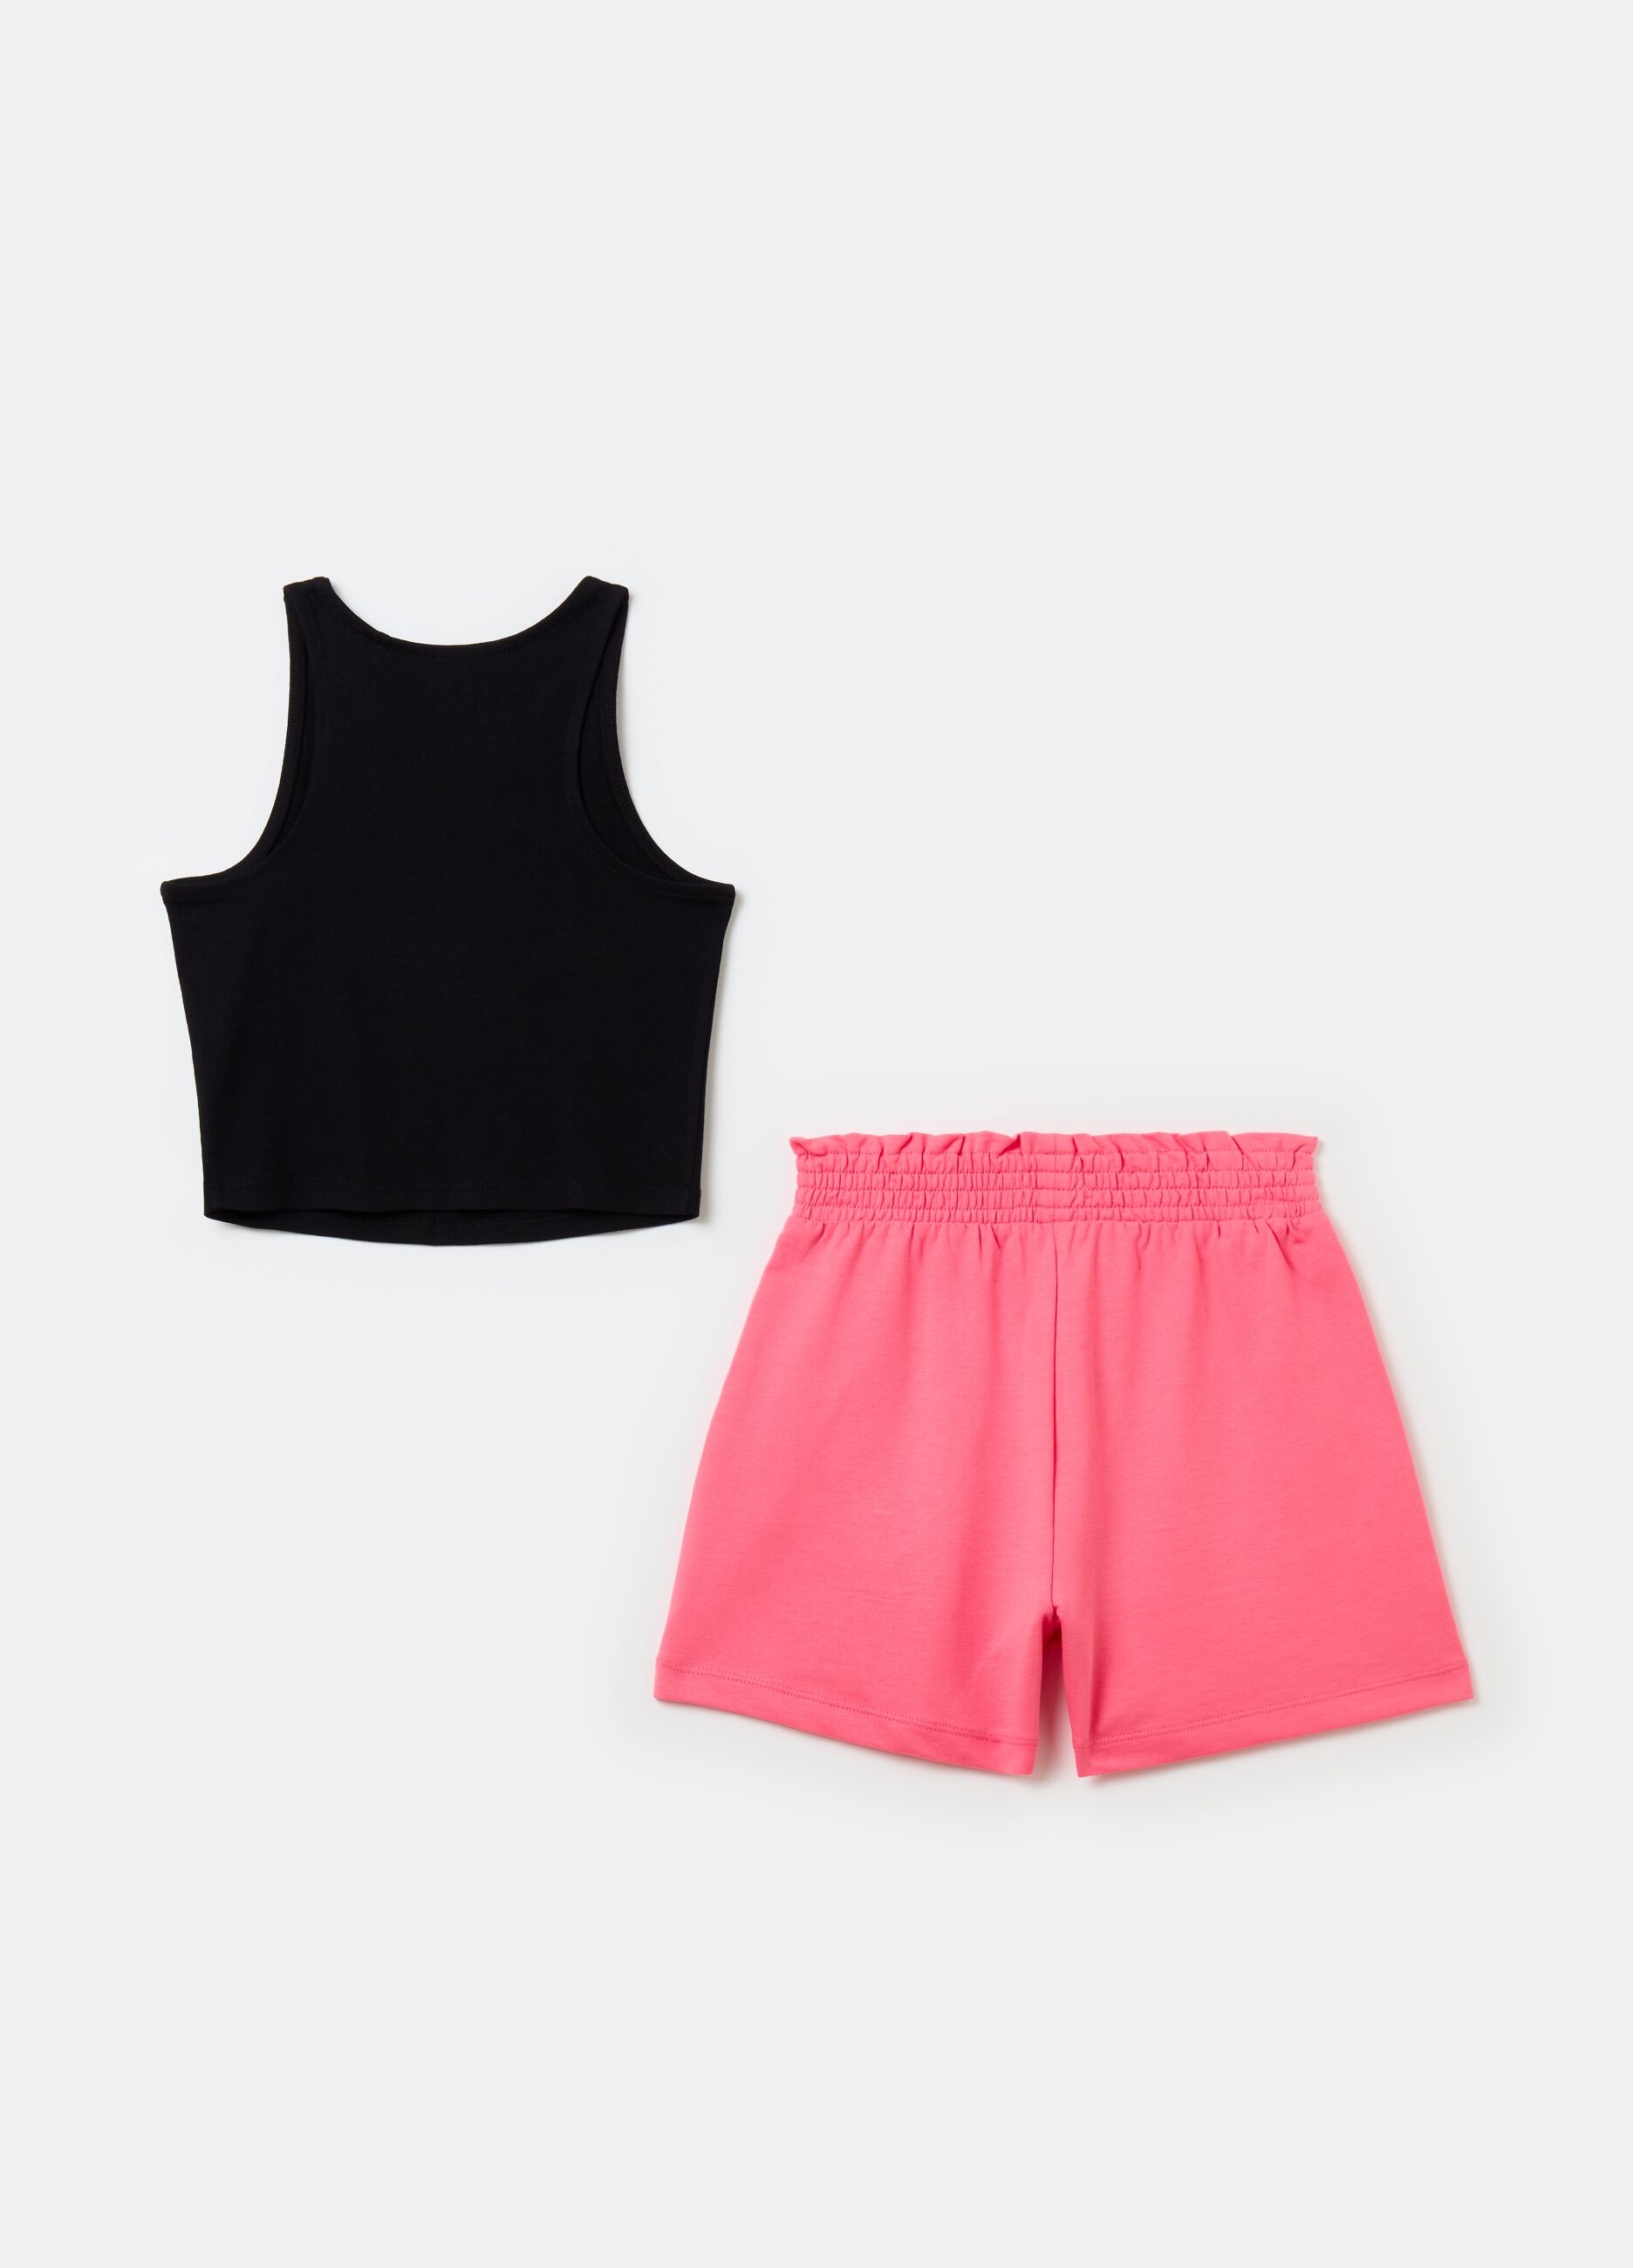 Jogging set with tank top and shorts with print